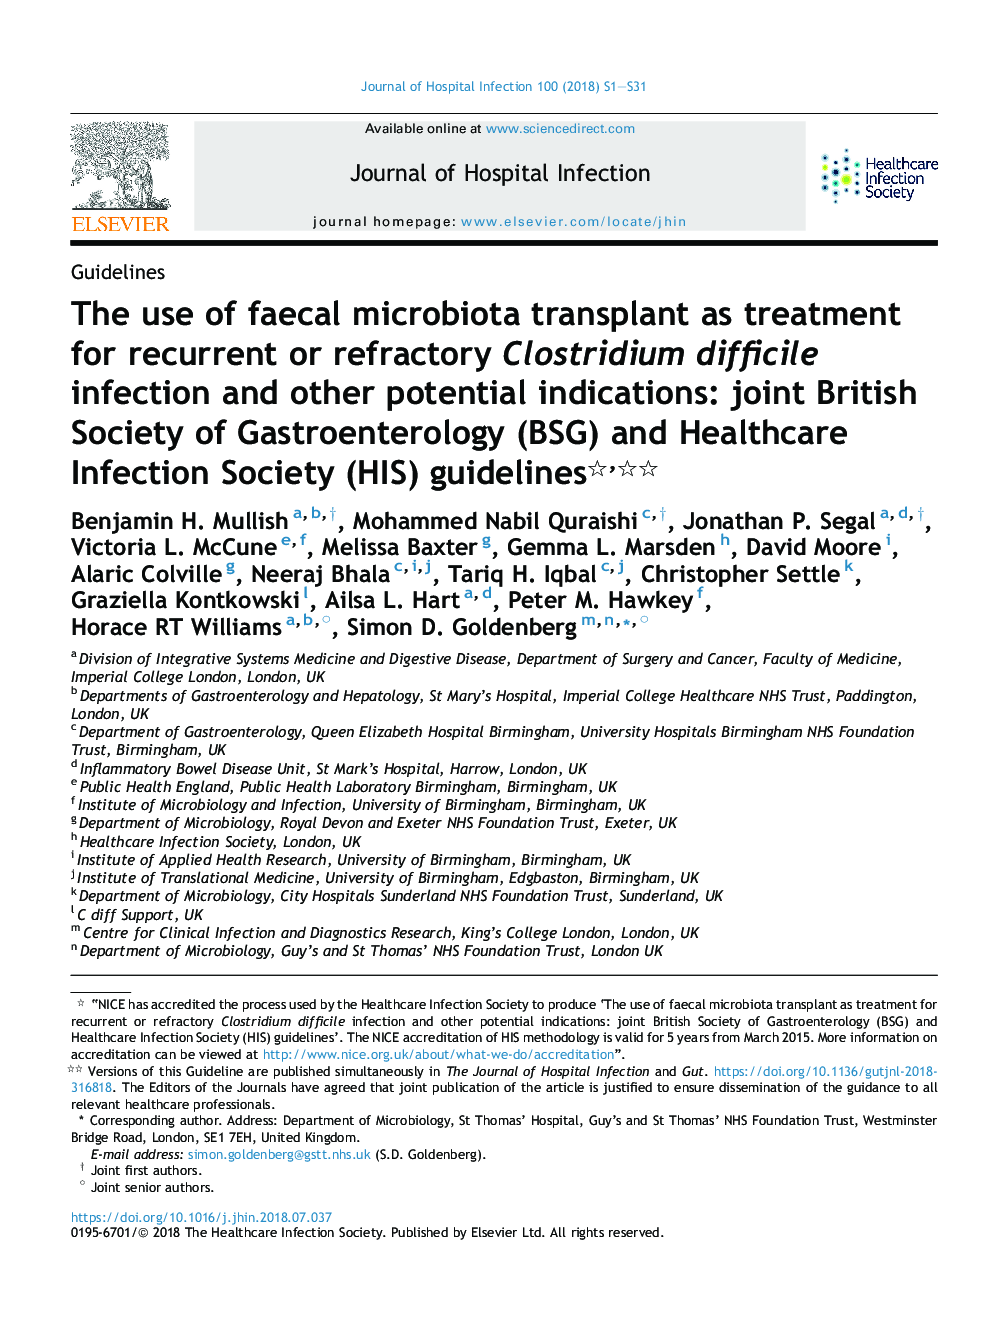 The use of faecal microbiota transplant as treatment for recurrent or refractory Clostridium difficile infection and other potential indications: joint British Society of Gastroenterology (BSG) and Healthcare Infection Society (HIS) guidelines